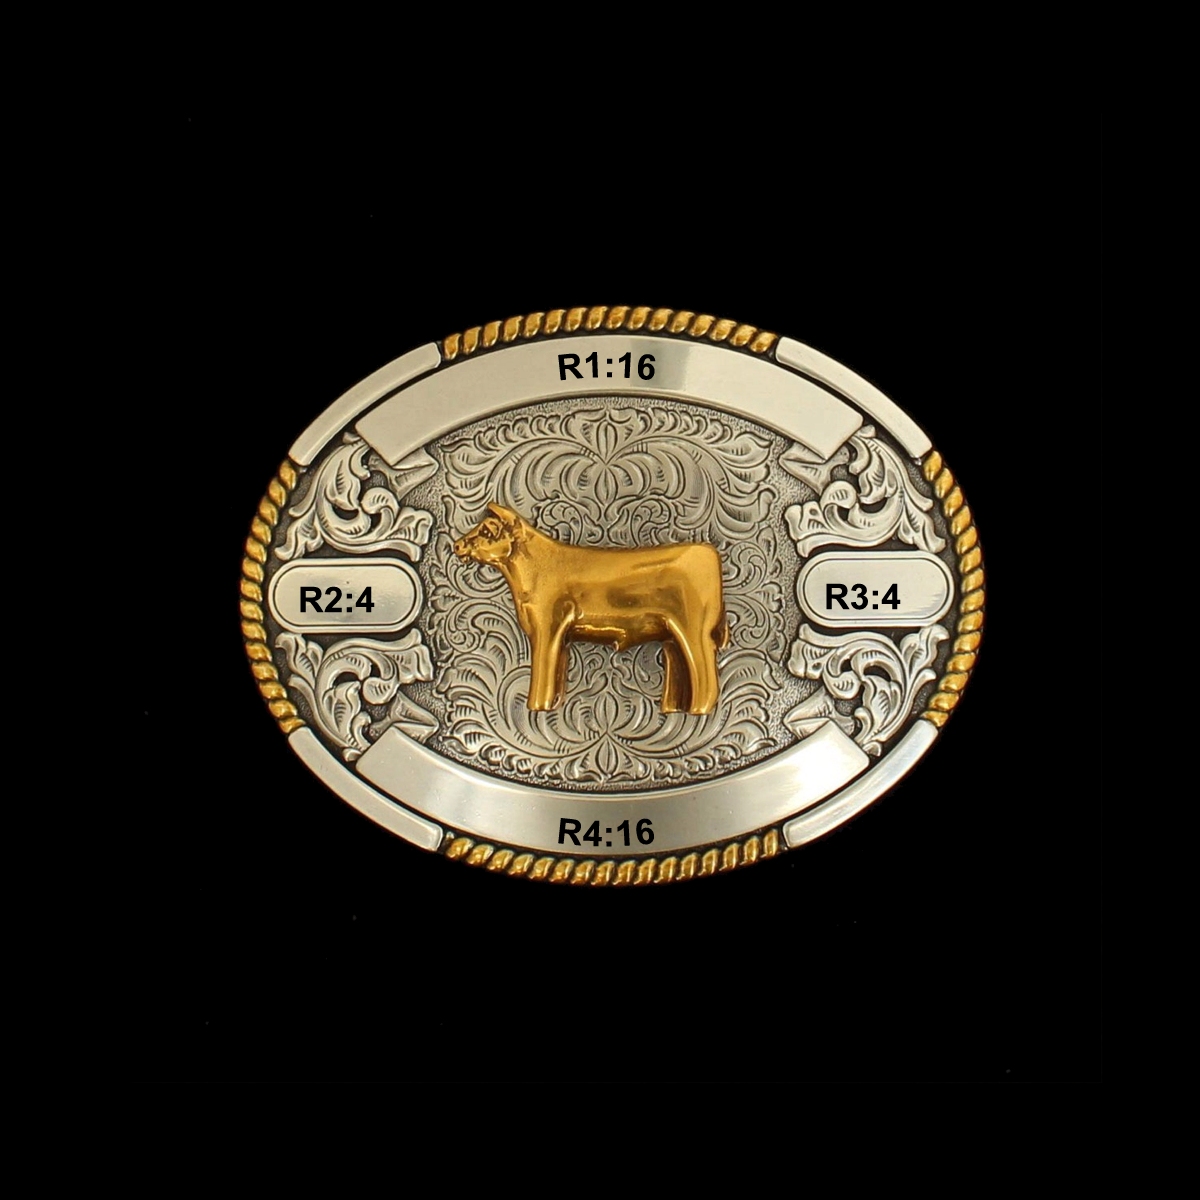 MF-38658 Trophy Buckle Oval Show Cow 4 Ribbons 2-7/8x3-3/4